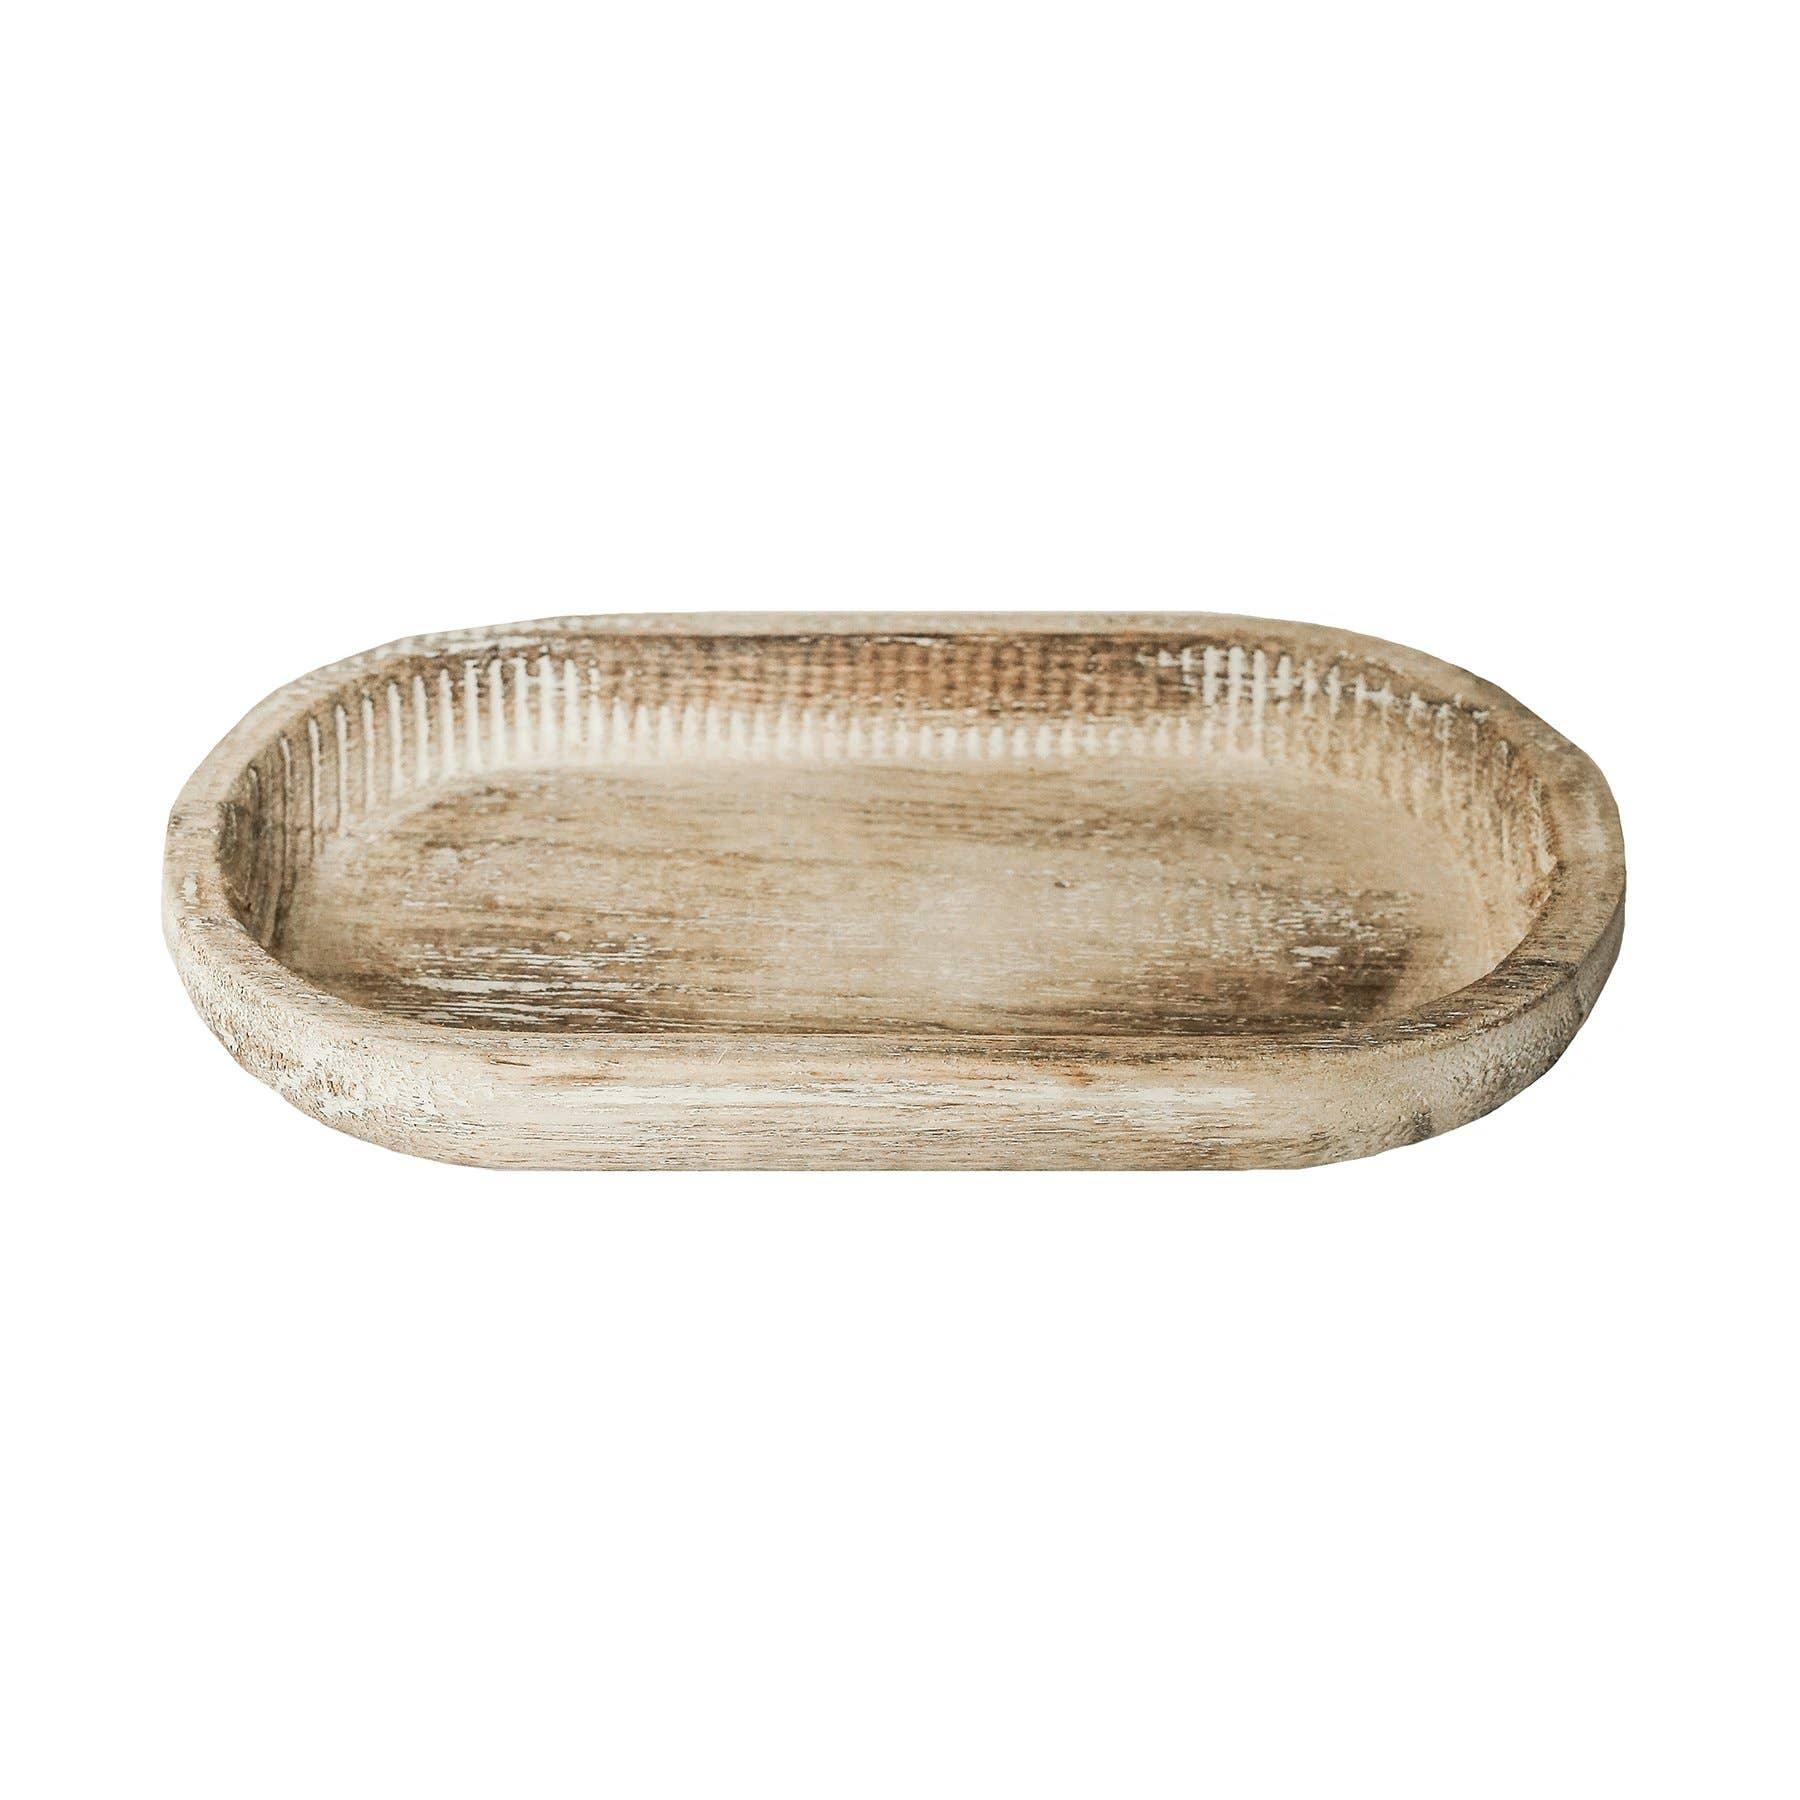 Small Wood Tray - Rustic - 6.9x3.7" - The Silver Dahlia